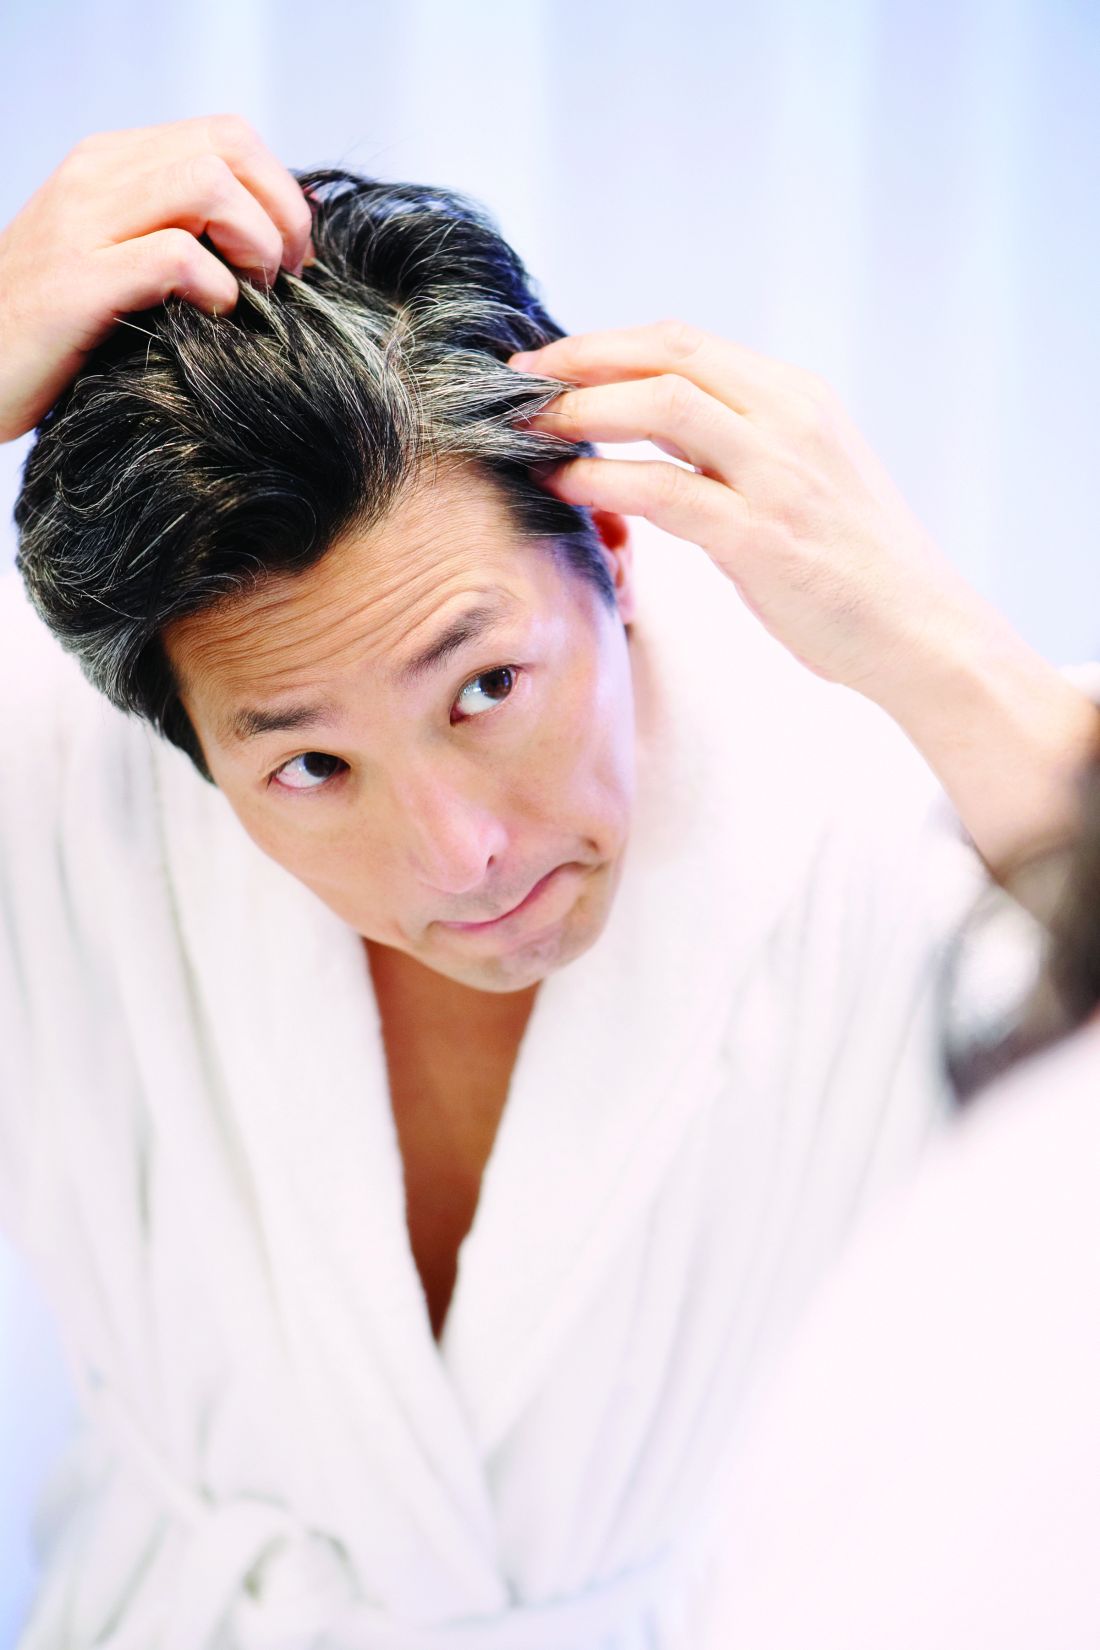 Graying of hair: Could it be reversed? | MDedge Dermatology